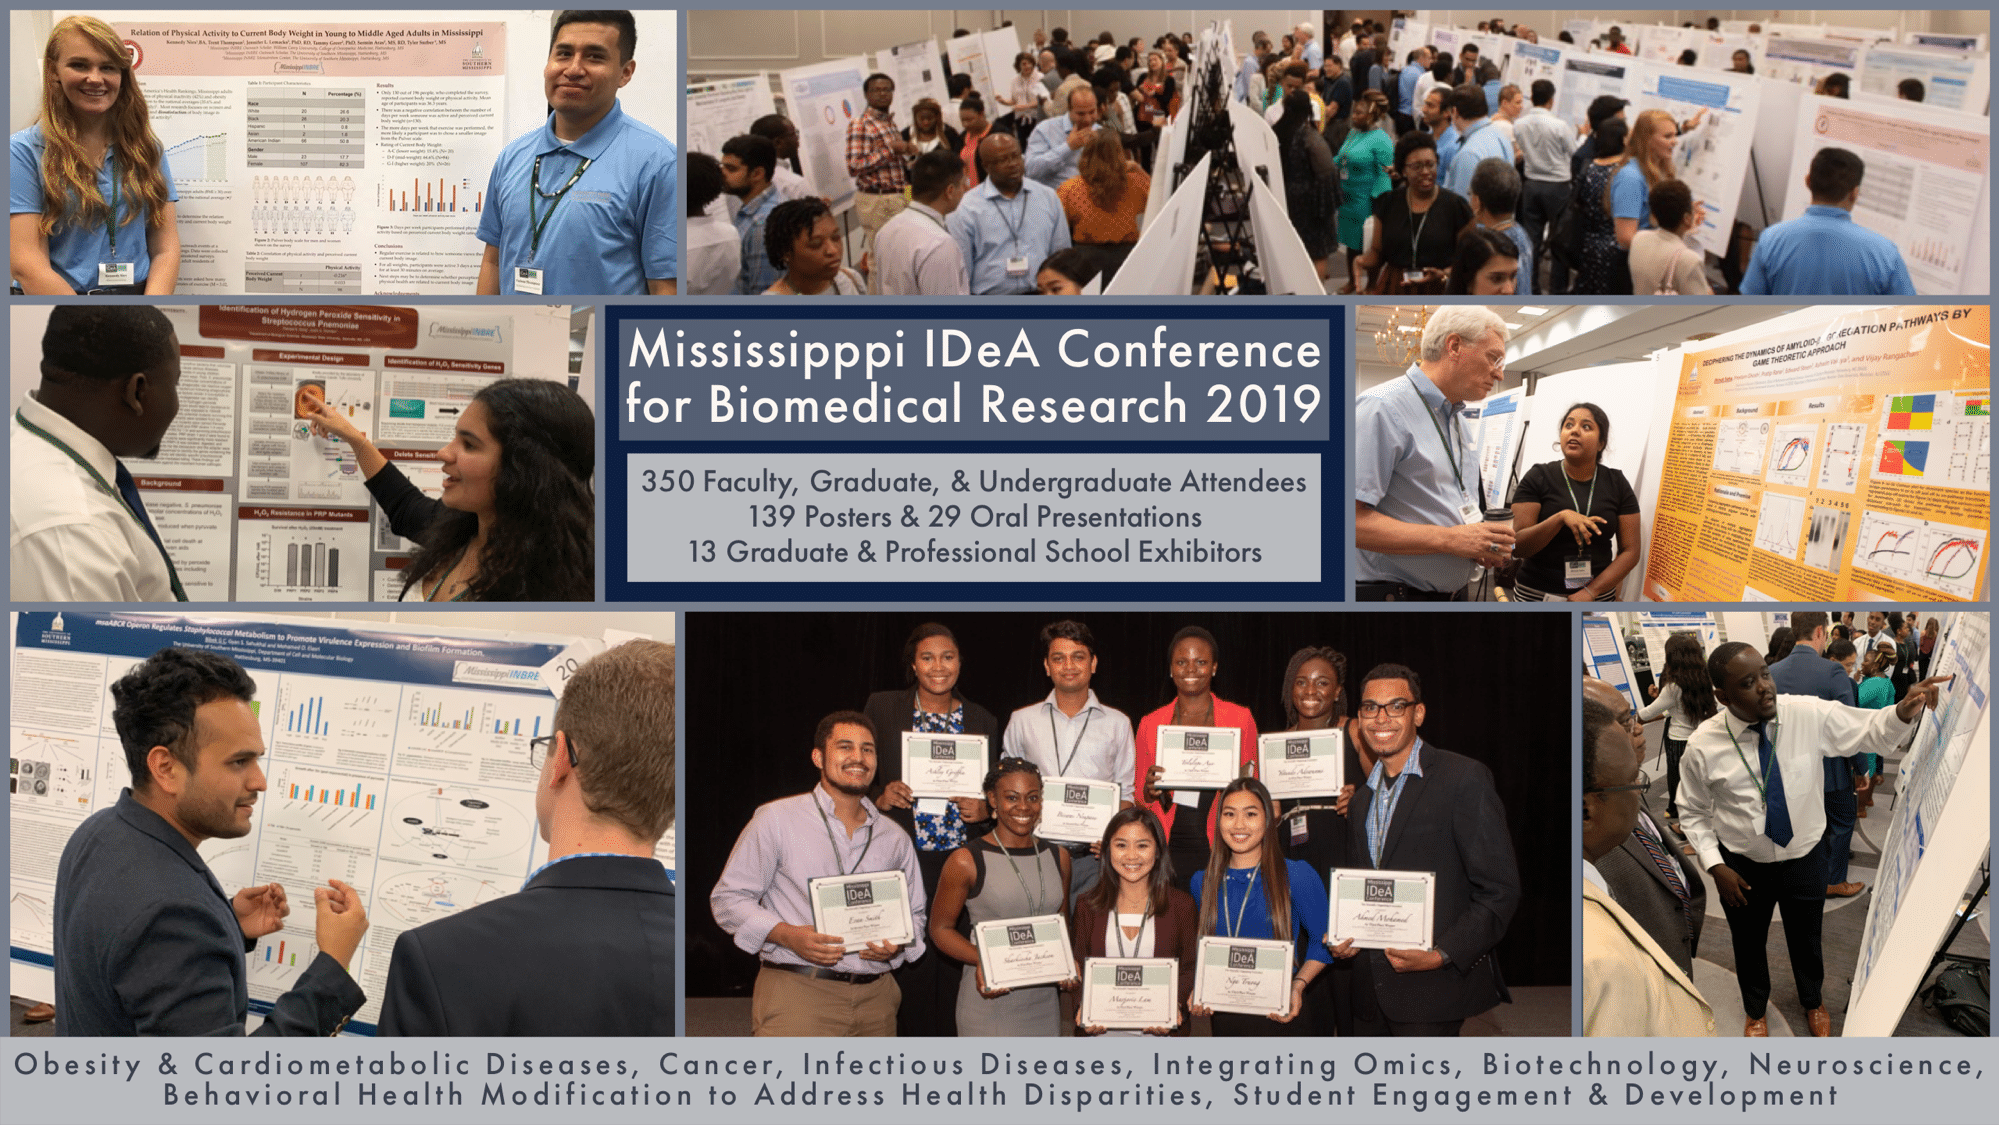 Impact of the Second Annual Mississippi IDeA Conference for Biomedical Research